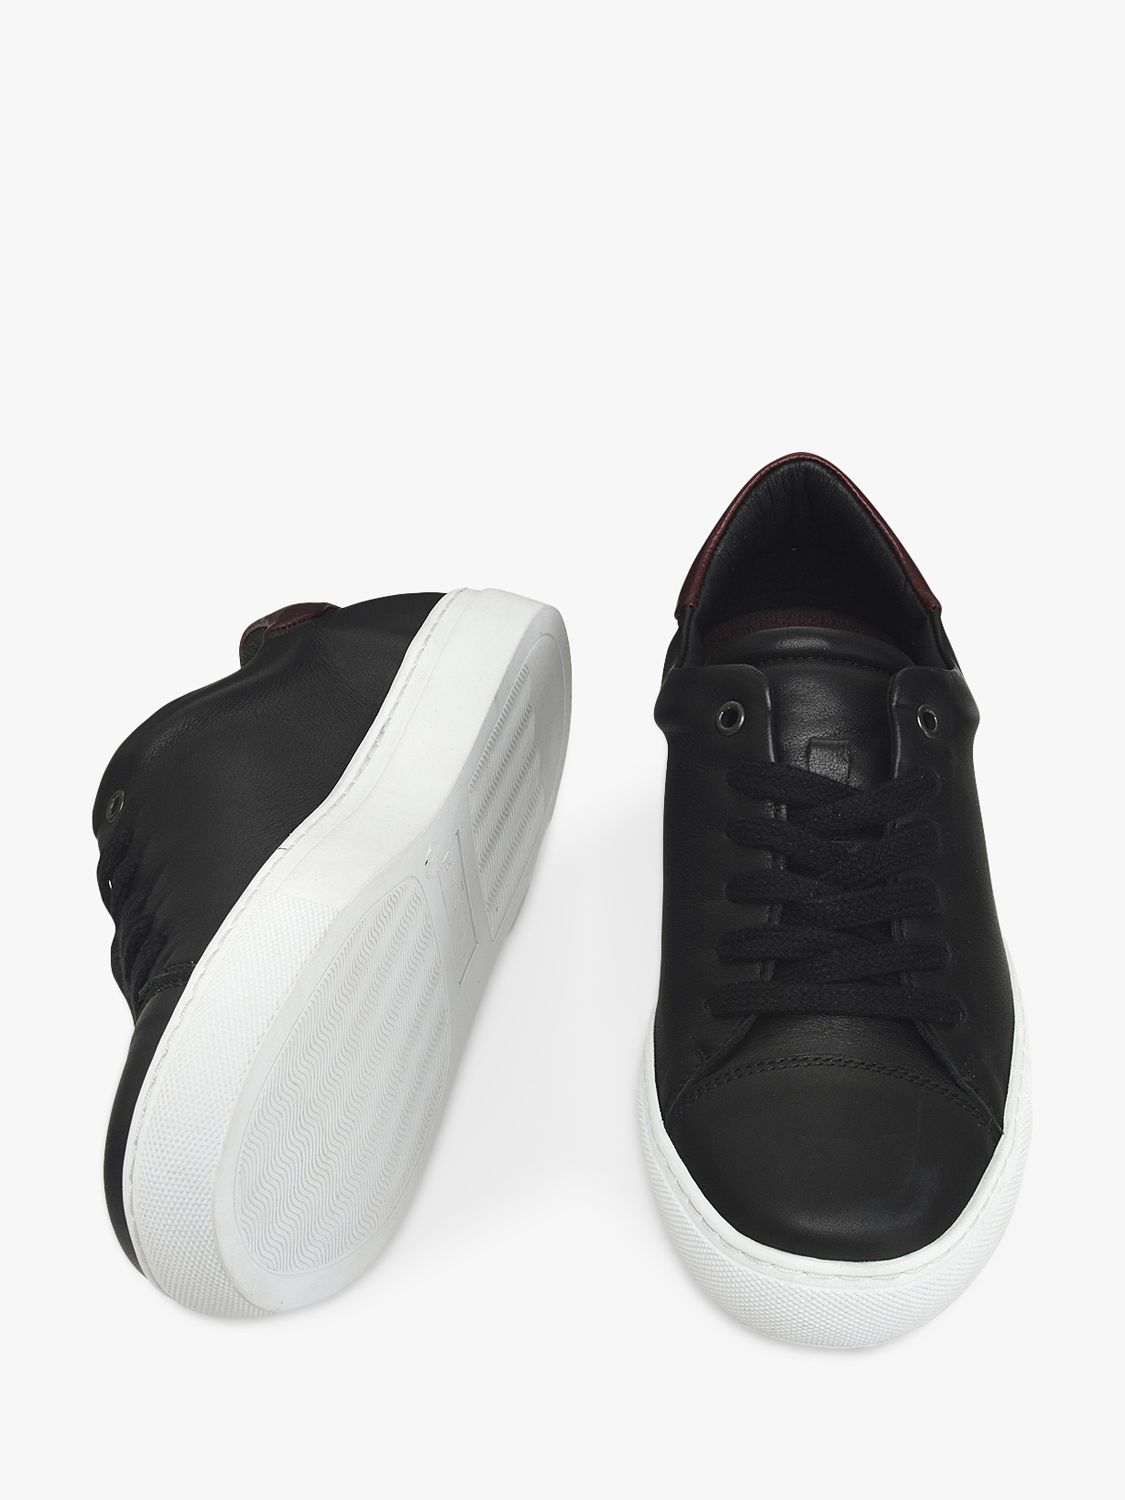 Buy Radley Malton 2.0 Leather Lace-Up Trainers Online at johnlewis.com